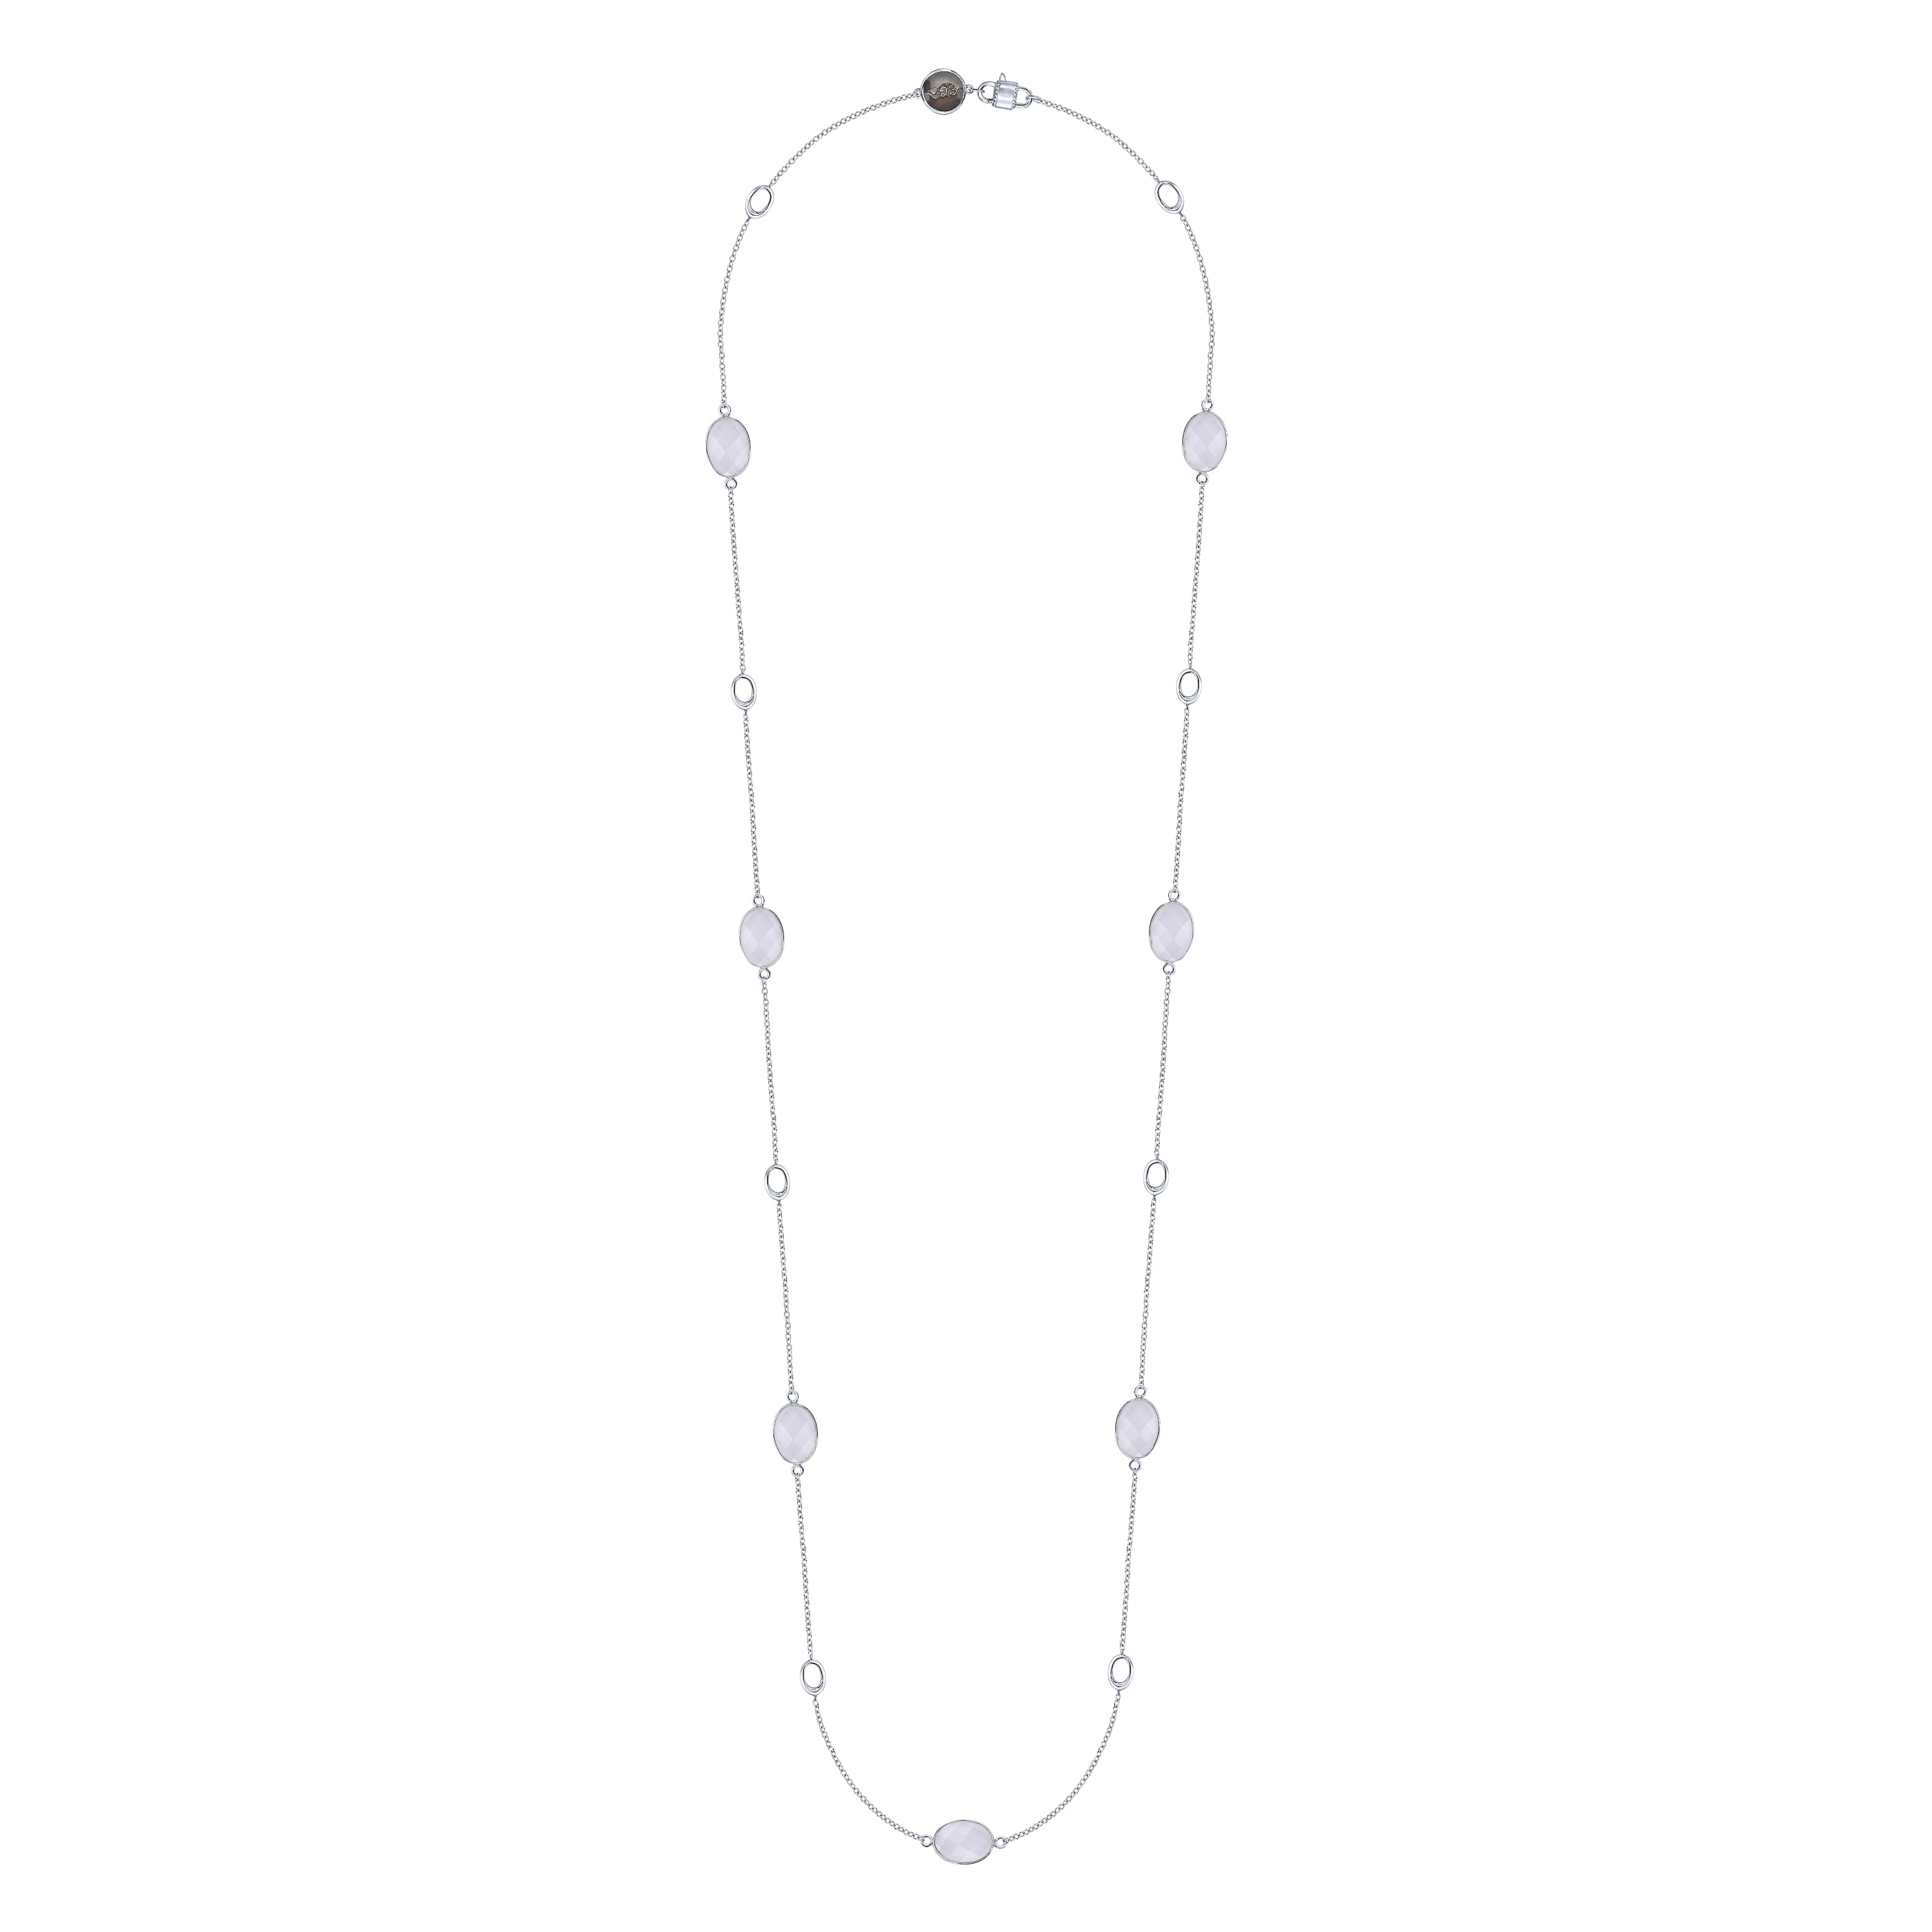 36 inch Long 925 Sterling Silver Oval White Agate Station Necklace